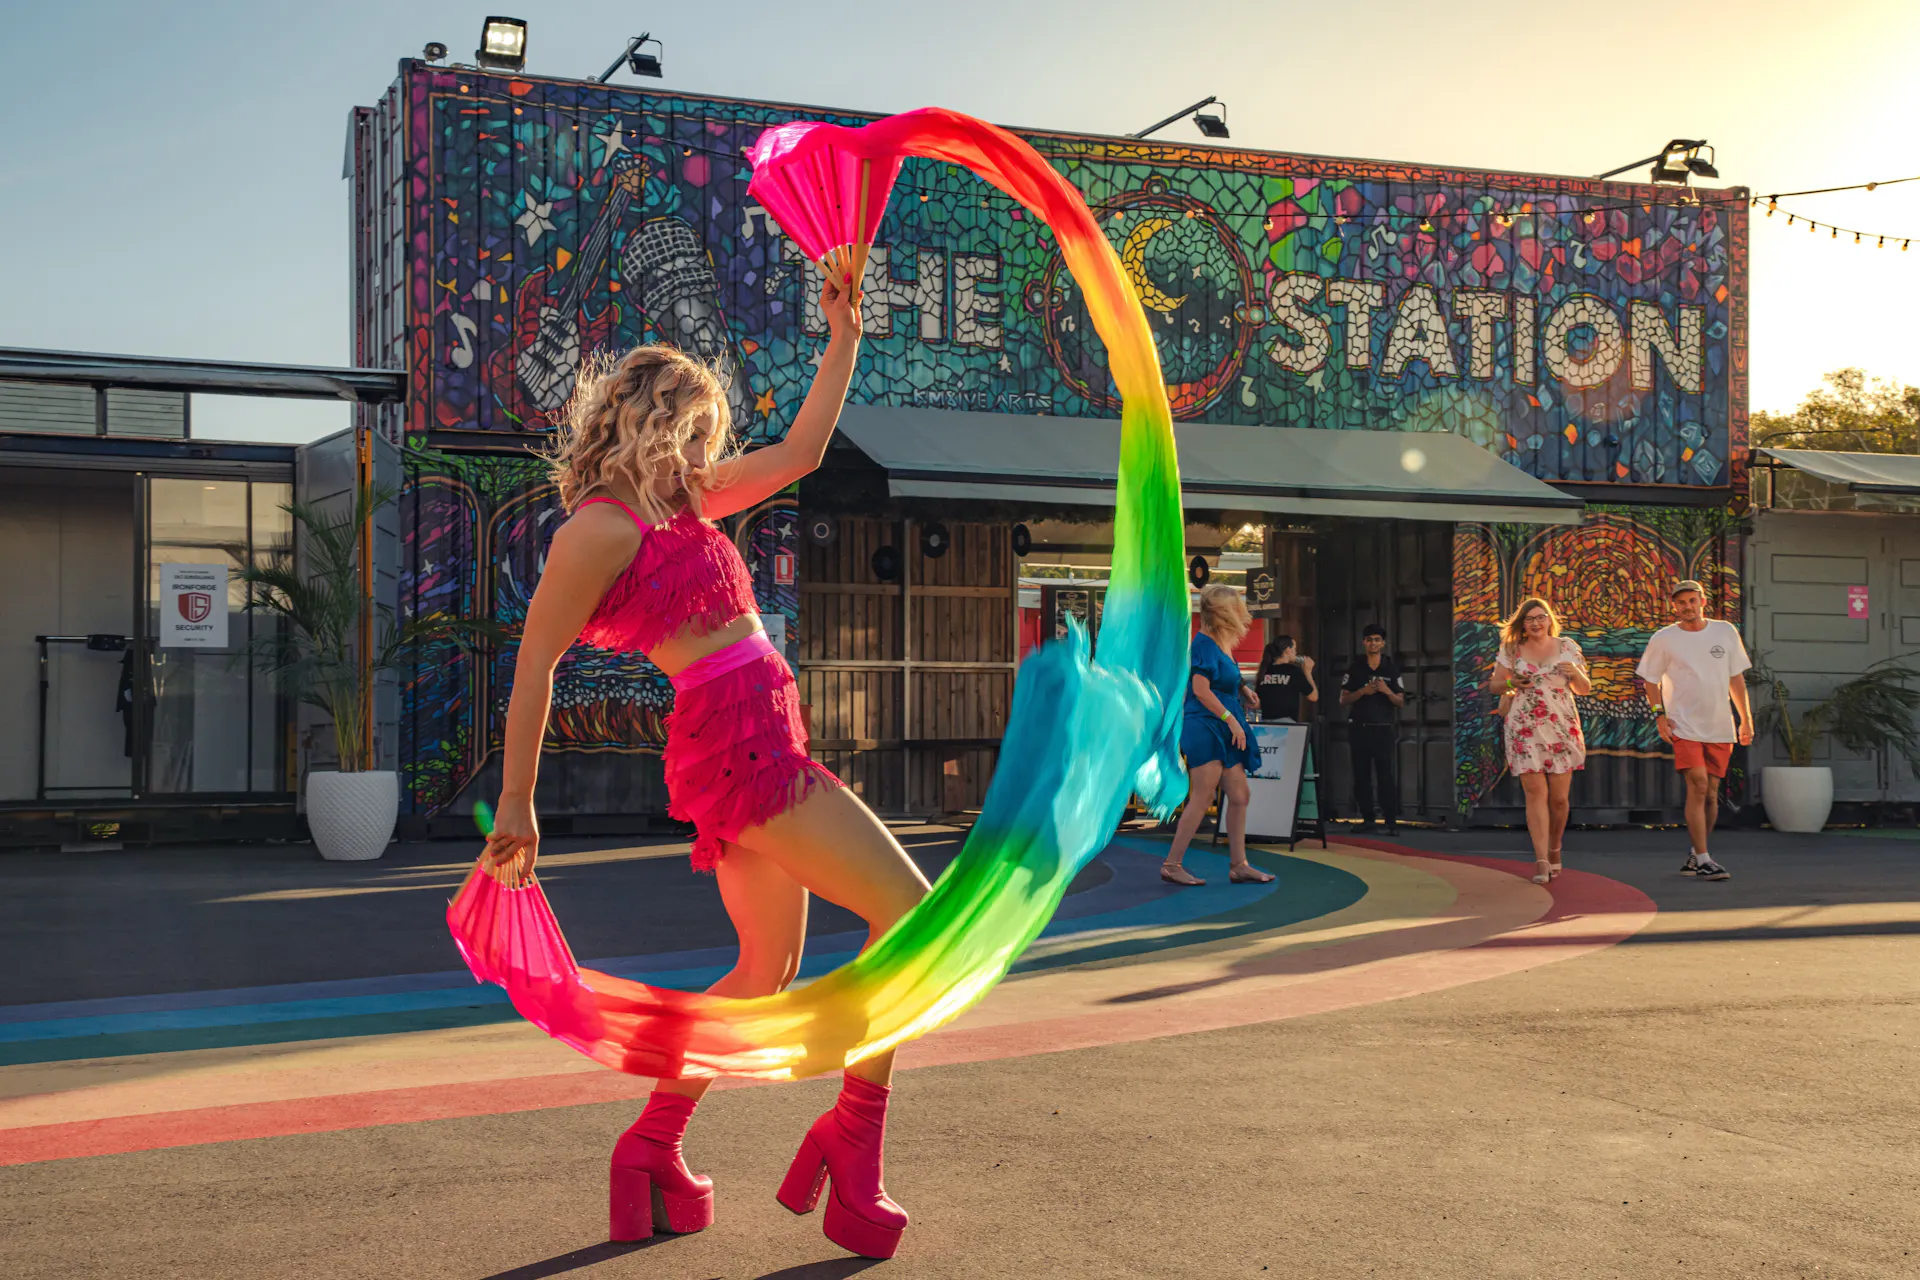 Entry to The Station showing dancer with colourful fan silks